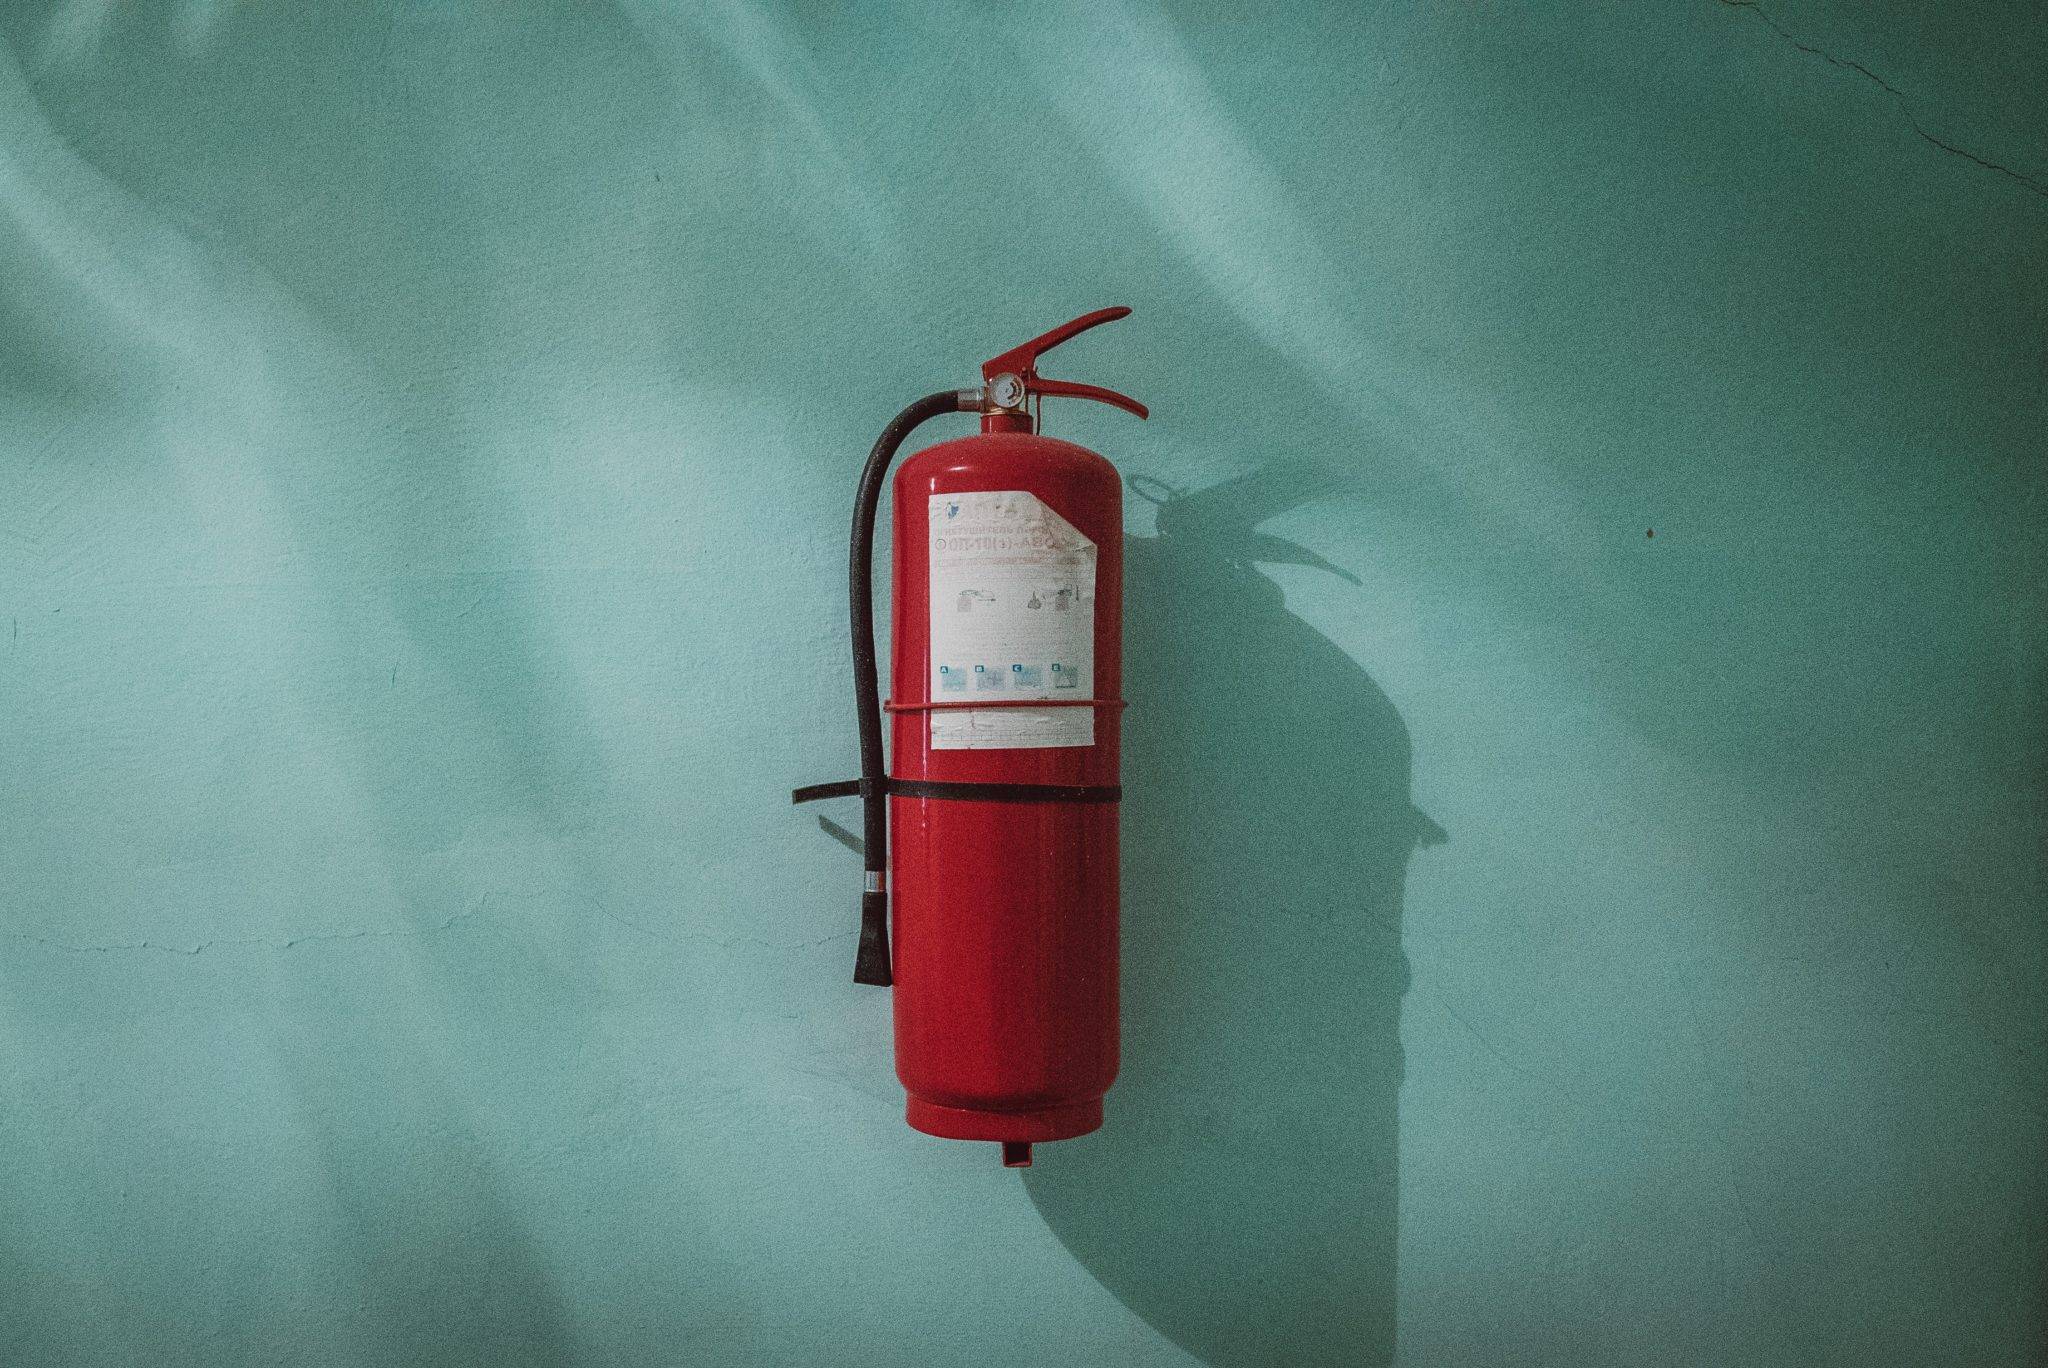 Airbnb Hosting A fire extinguisher in an Airbnb hosting space with a distinct red color, contrasting against the blue wall.